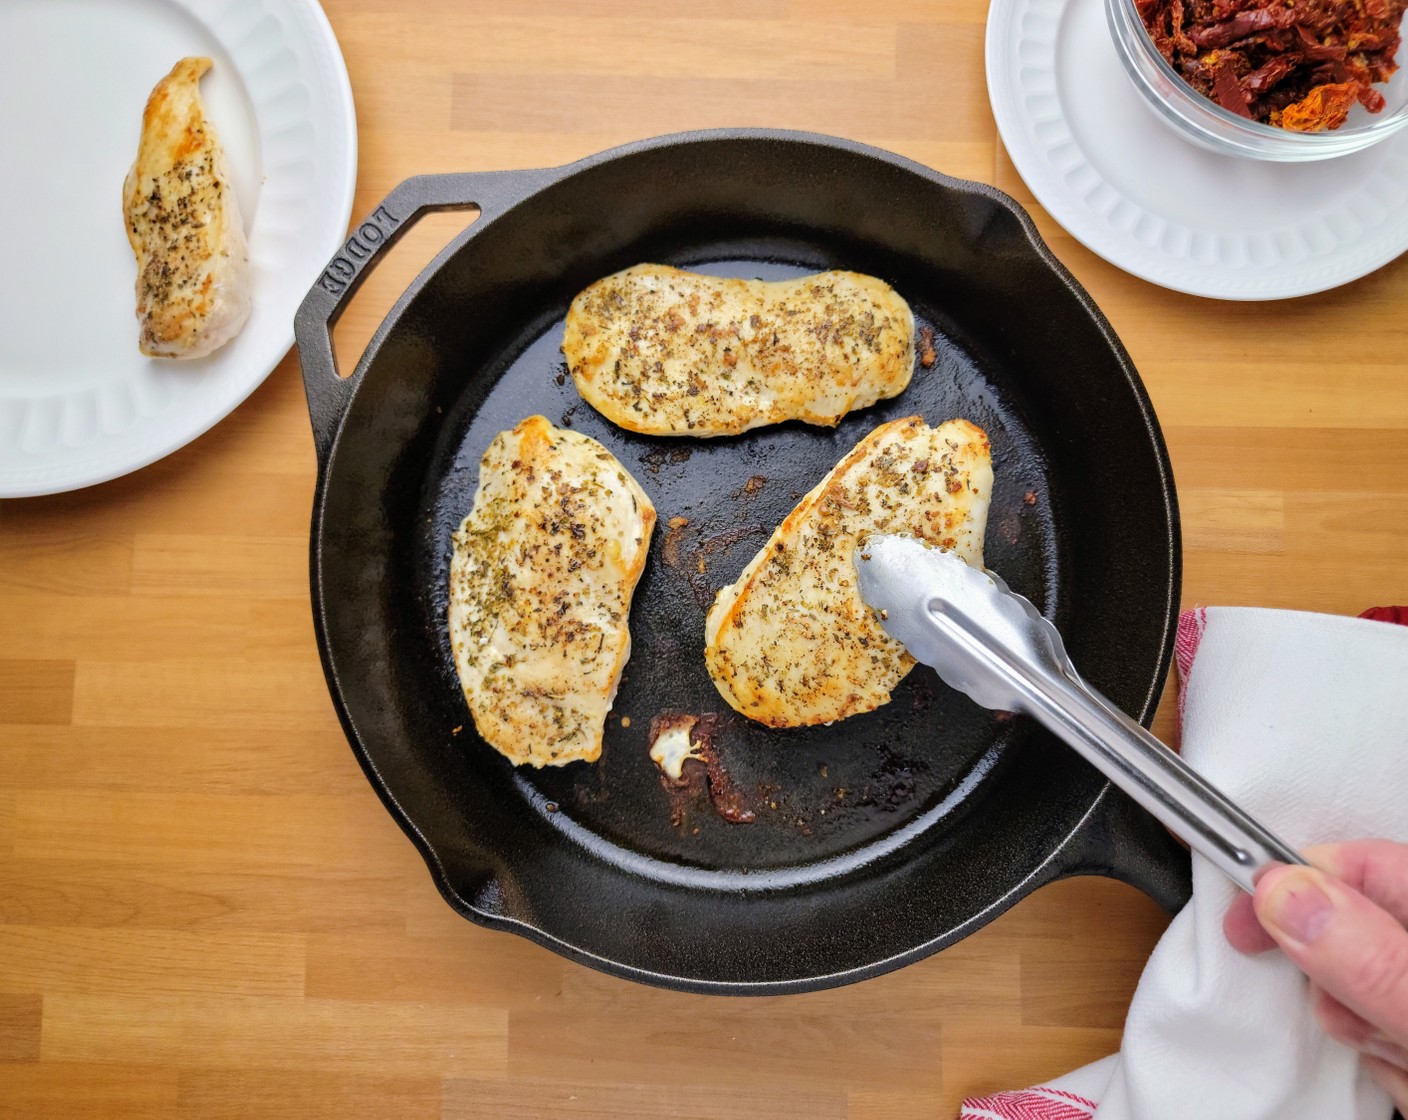 step 5 Add Olive Oil (1 Tbsp) to a large saucepan over medium-high heat and cook the chicken breasts for 4 to 5 minutes on each side, until nicely brown. Remove the chicken from the pan and set aside.